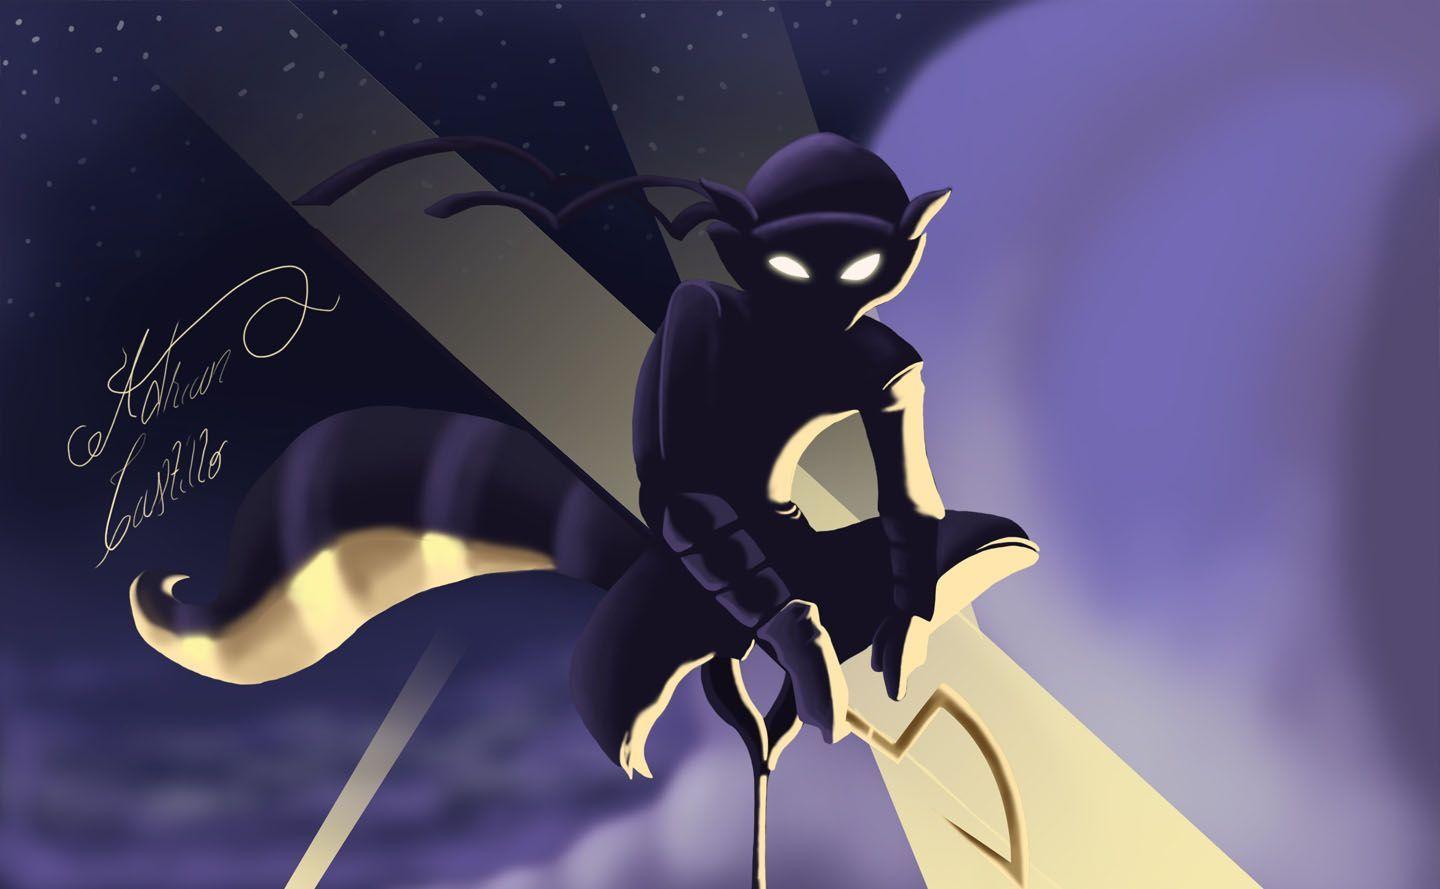 Sly Cooper Wallpapers 1440x889